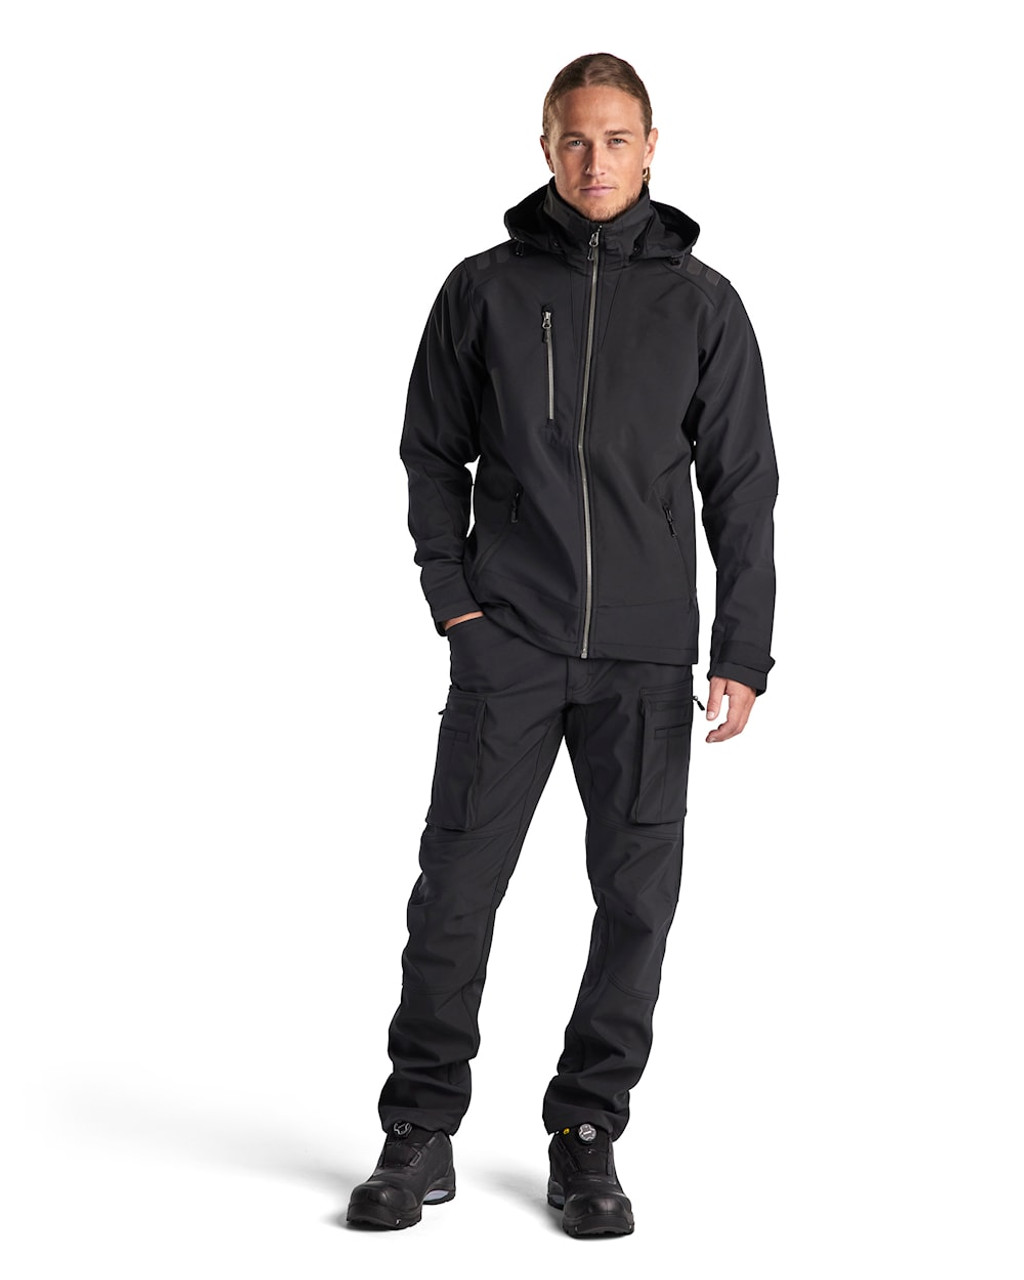 BLAKLADER Jacket  4749  with  for BLAKLADER Jacket  | 4749 Mens Black Full Zip Jacket in Waterproof Softshell that have Full Zip  available in Australia and New Zealand